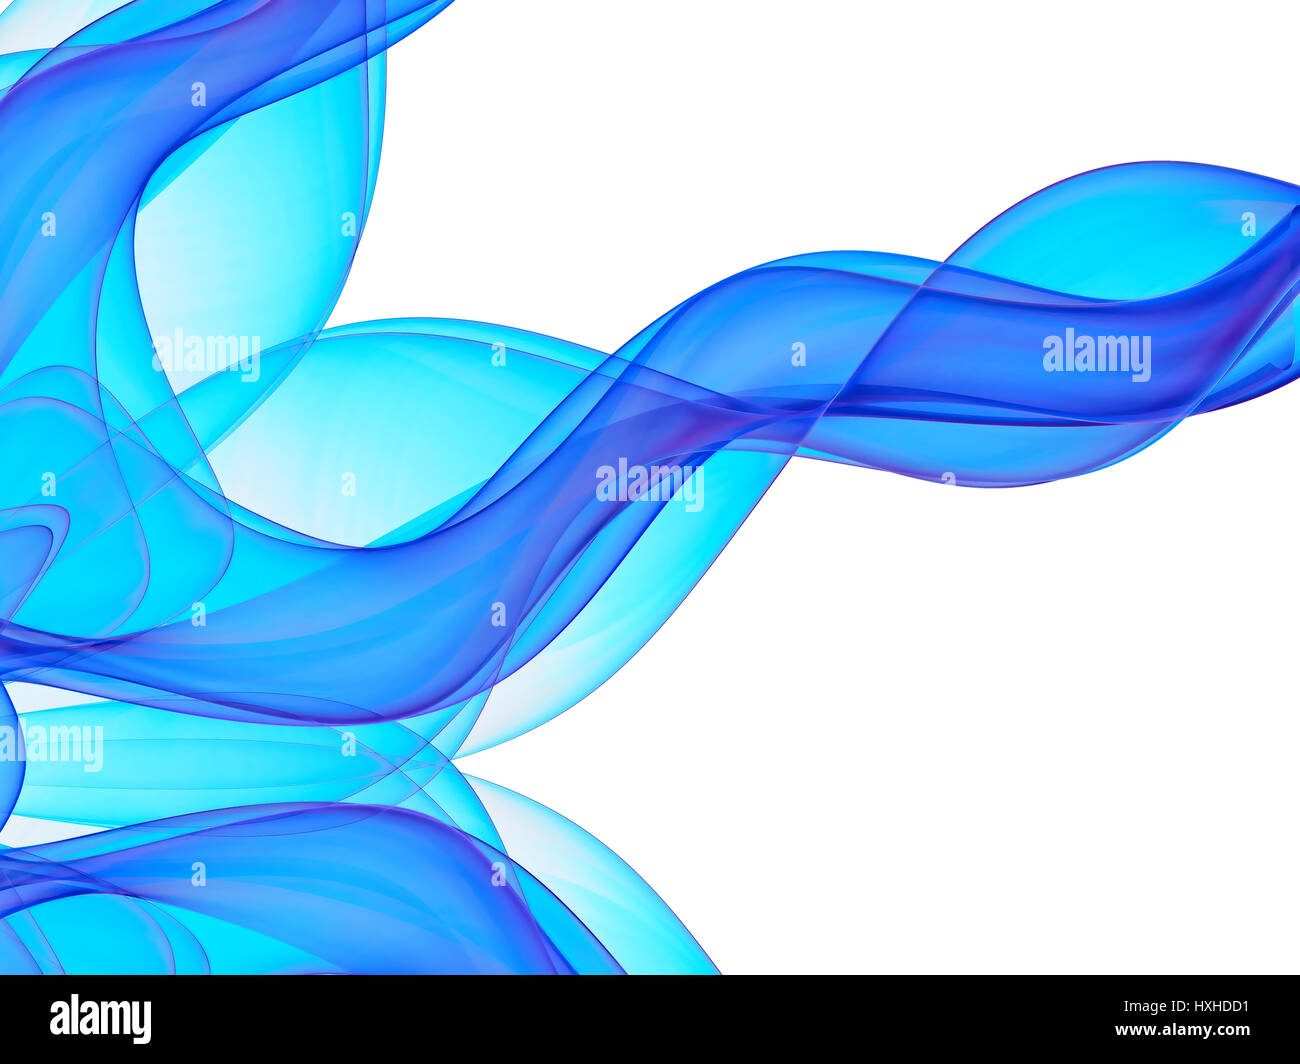 Fractal wave - abstract digitally generated image Stock Photo